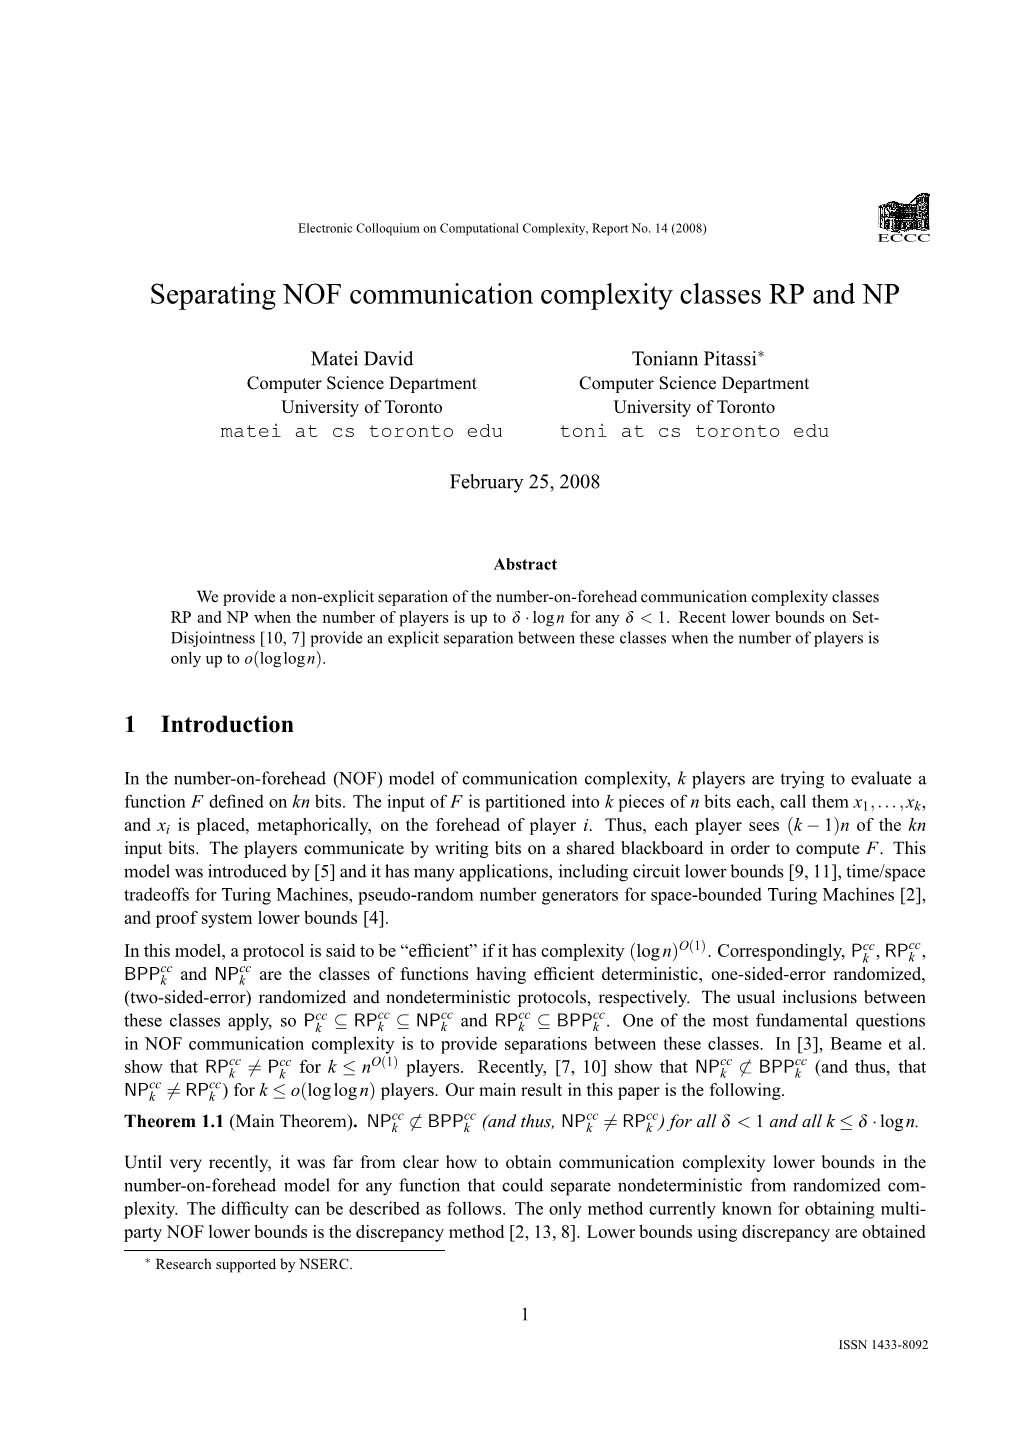 Separating NOF Communication Complexity Classes RP and NP